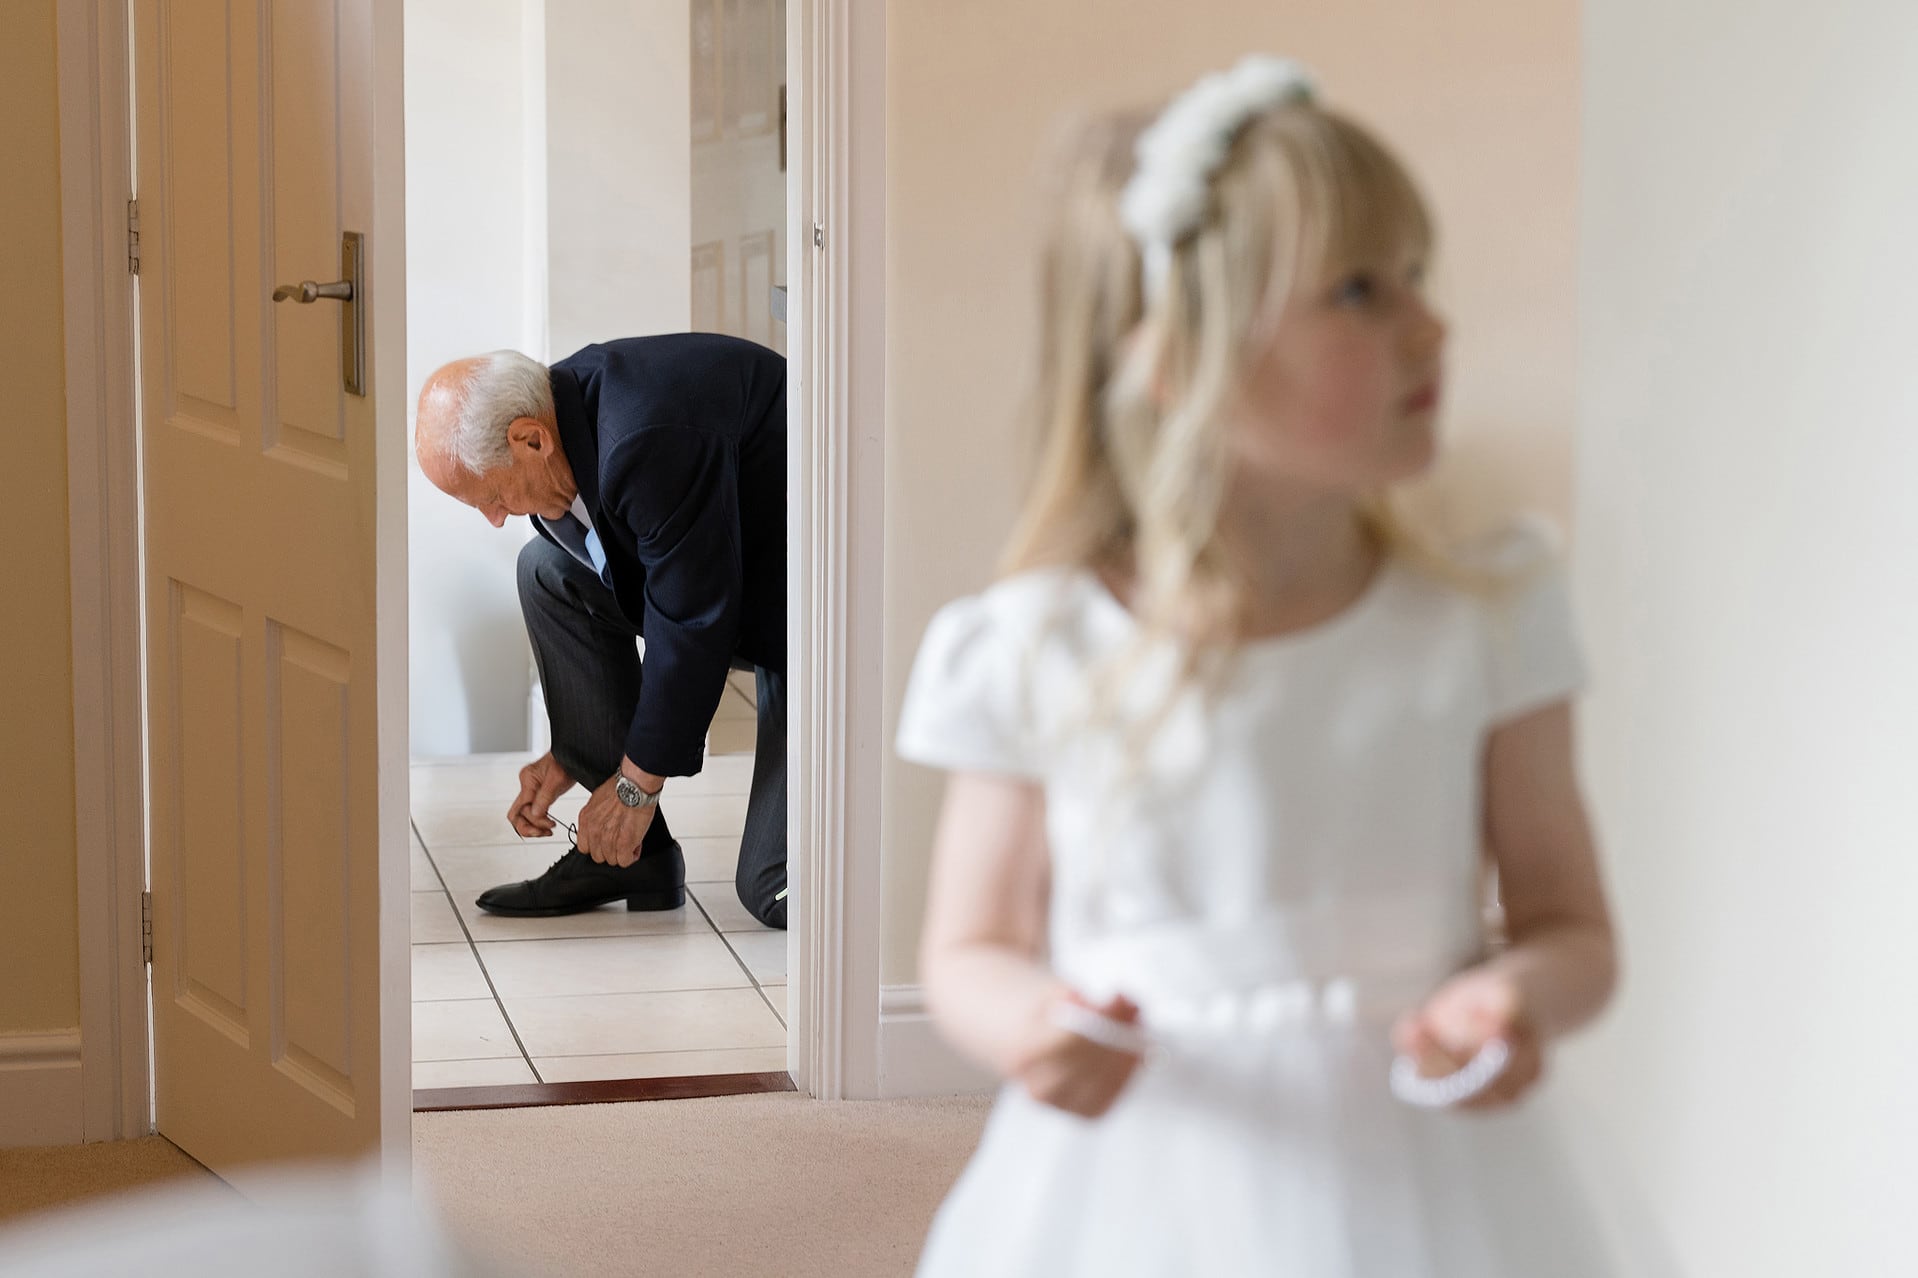 Bride's dad bending down to tie his shoelace with flower girl out of focus in the foreground